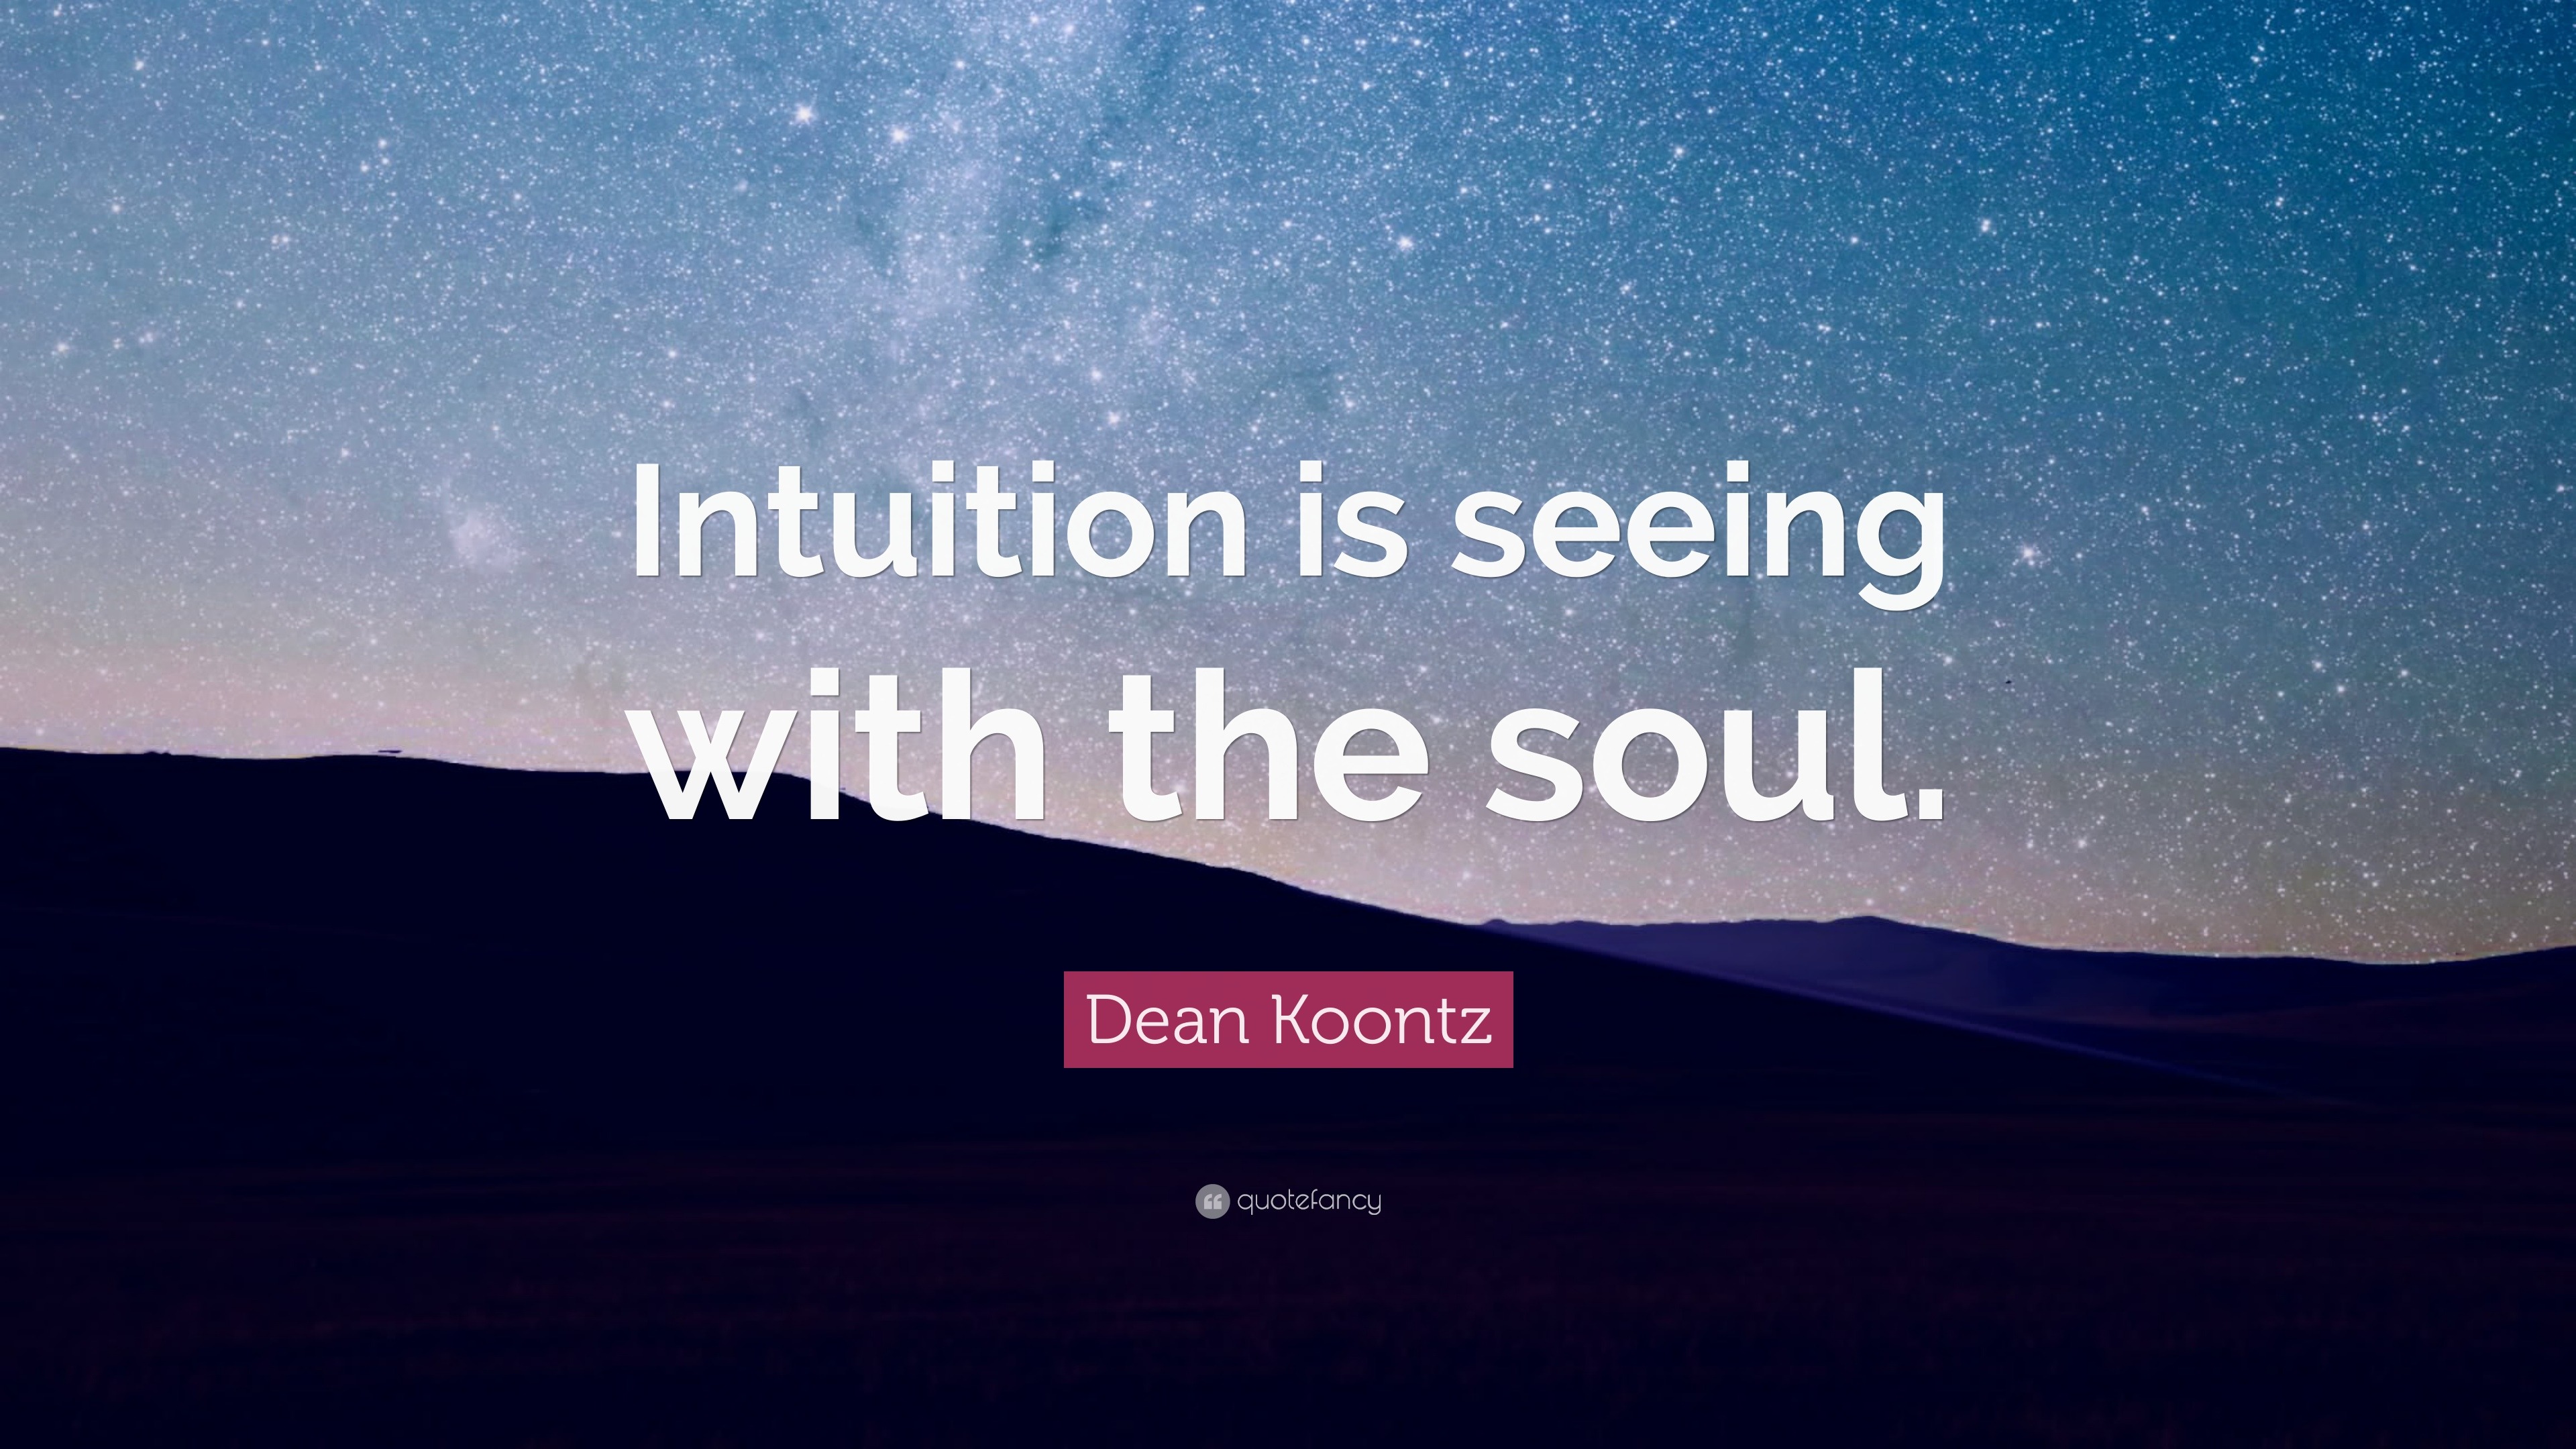 Dean Koontz Quote “intuition Is Seeing With The Soul”